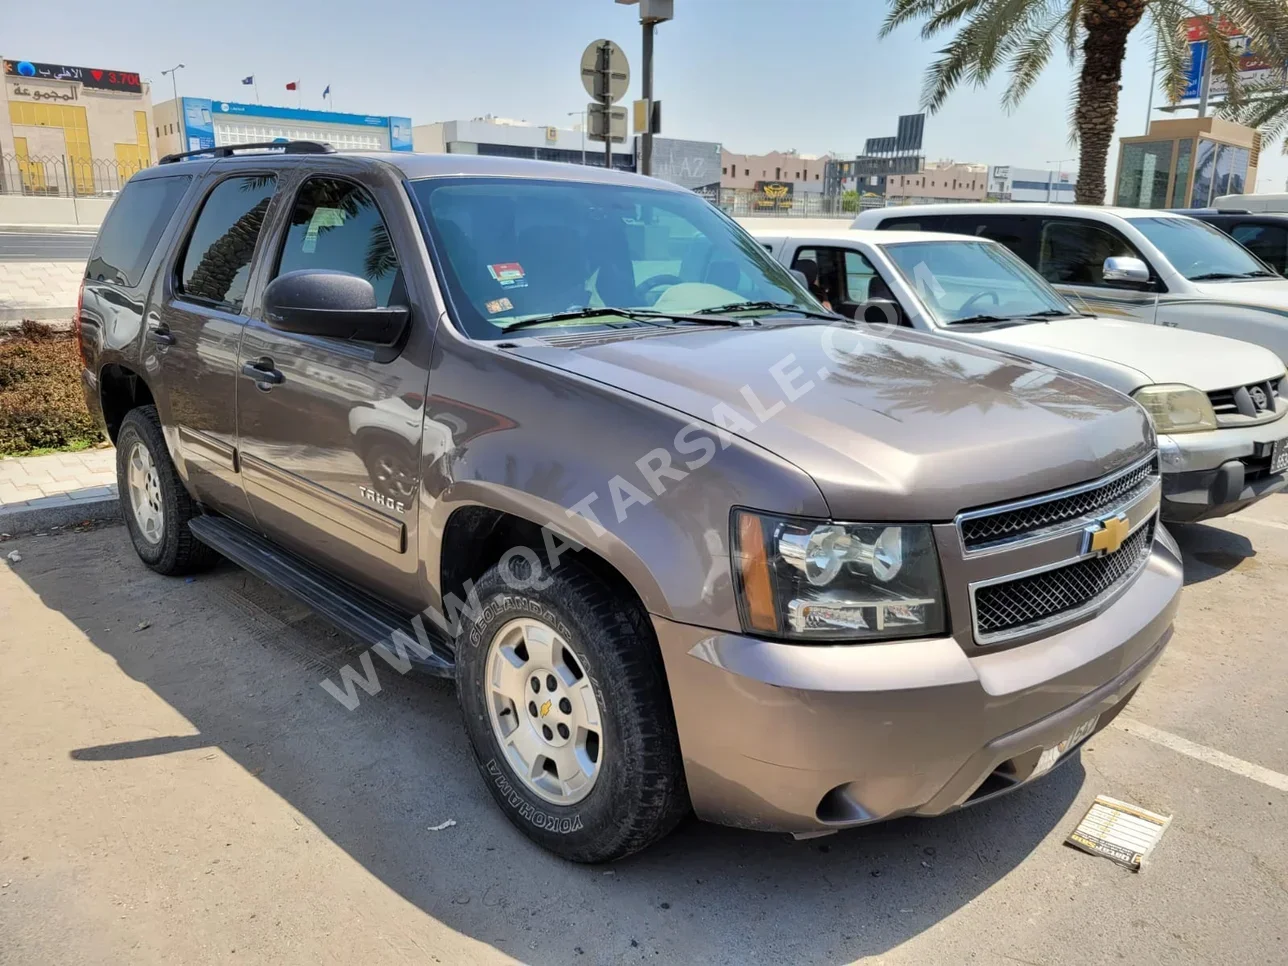  Chevrolet  Tahoe  2014  Automatic  275,000 Km  8 Cylinder  Four Wheel Drive (4WD)  SUV  Gray  With Warranty